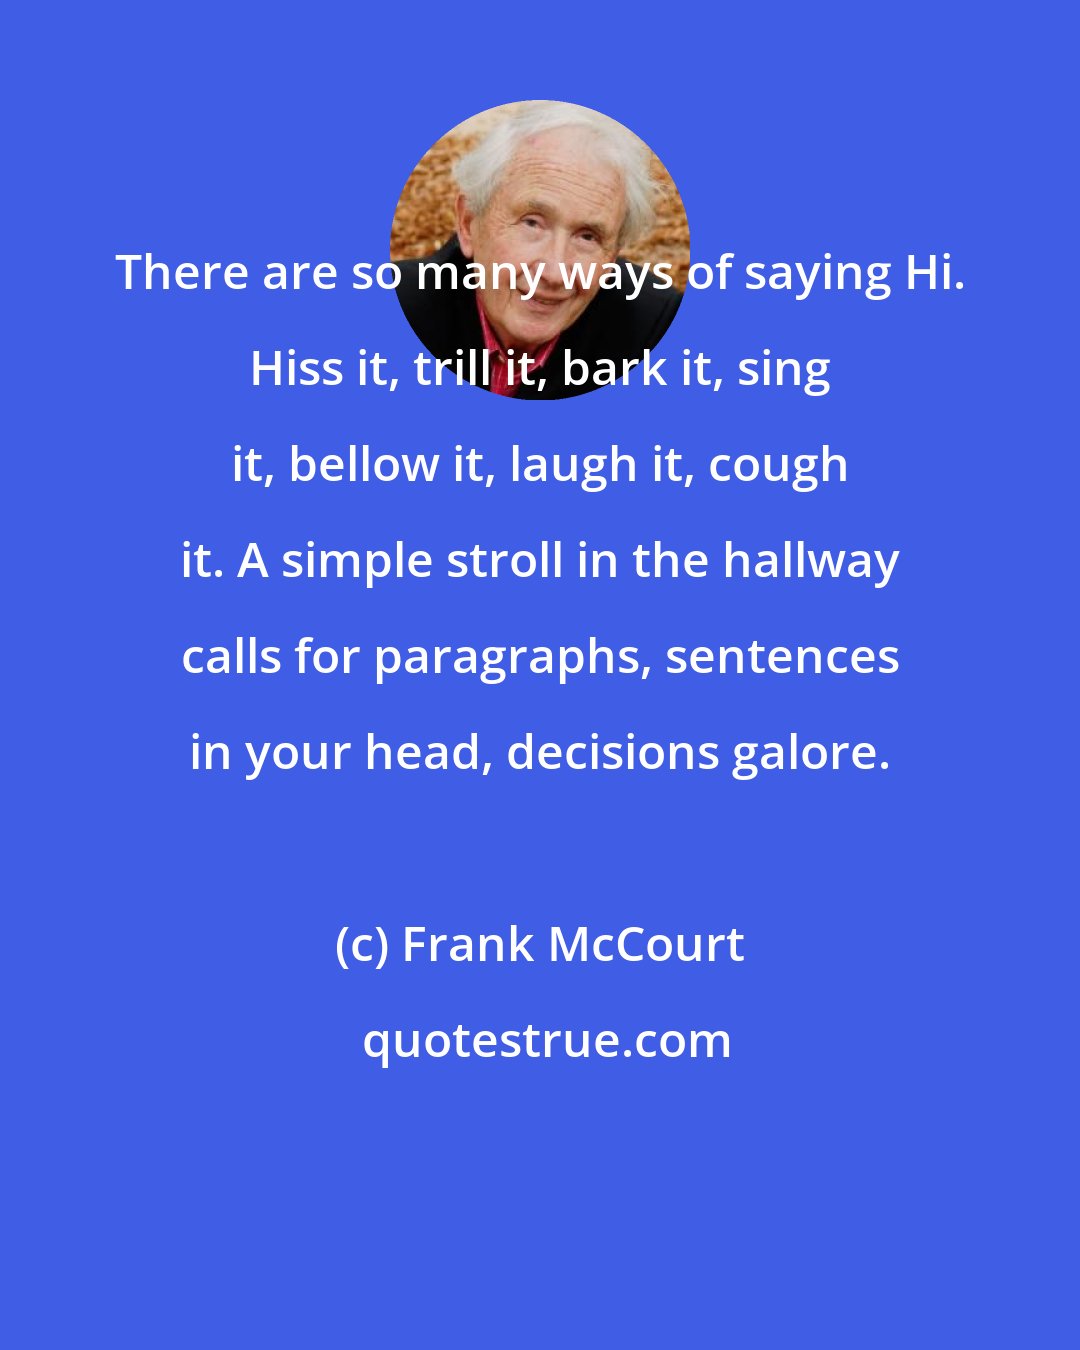 Frank McCourt: There are so many ways of saying Hi. Hiss it, trill it, bark it, sing it, bellow it, laugh it, cough it. A simple stroll in the hallway calls for paragraphs, sentences in your head, decisions galore.